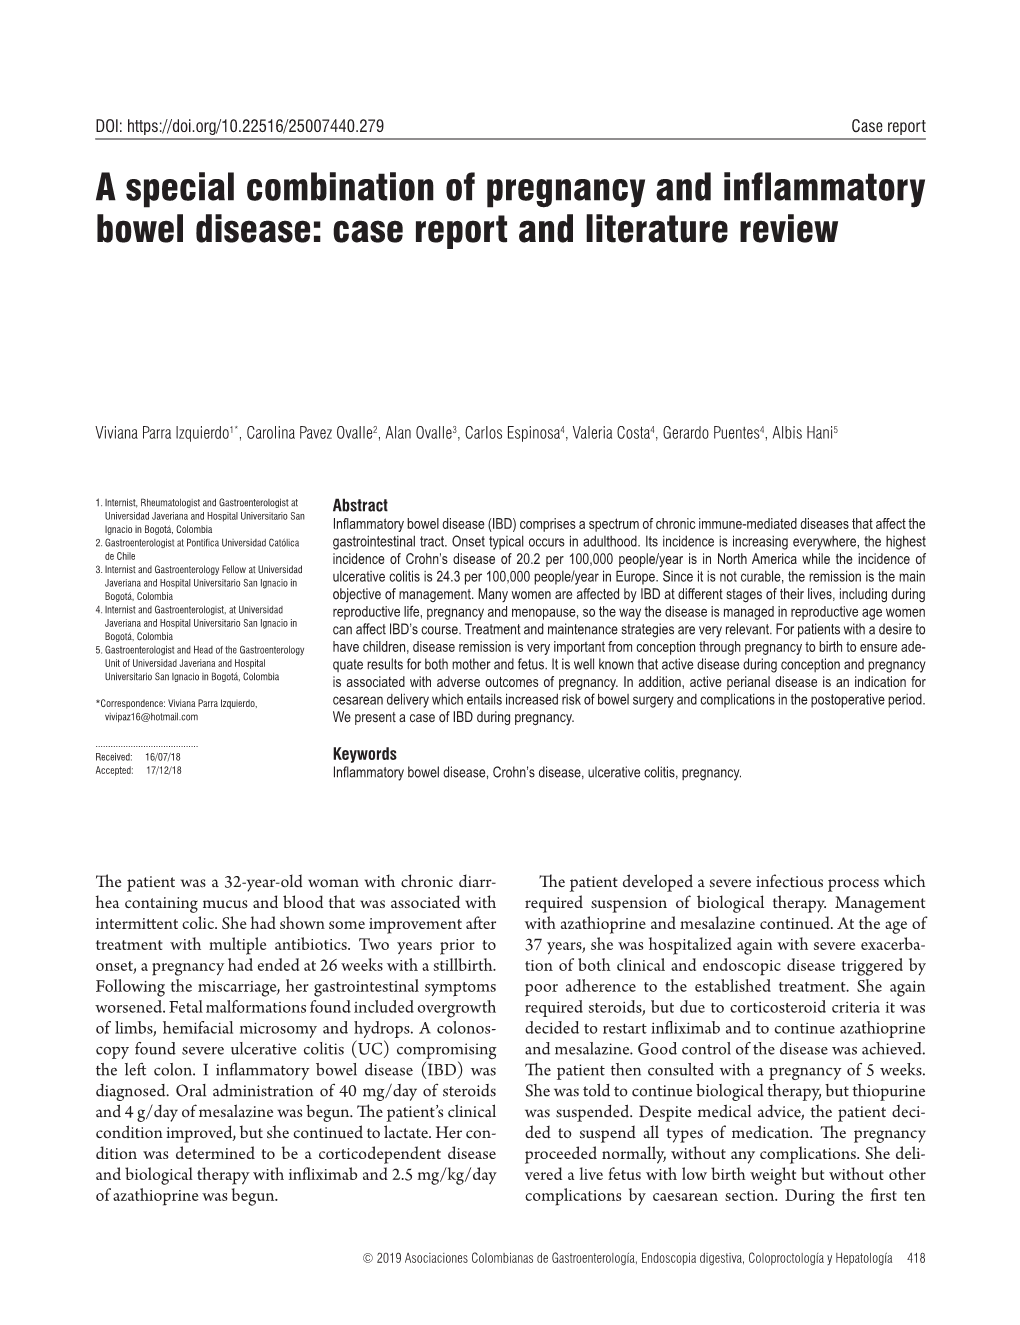 A Special Combination of Pregnancy and Inflammatory Bowel Disease: Case Report and Literature Review